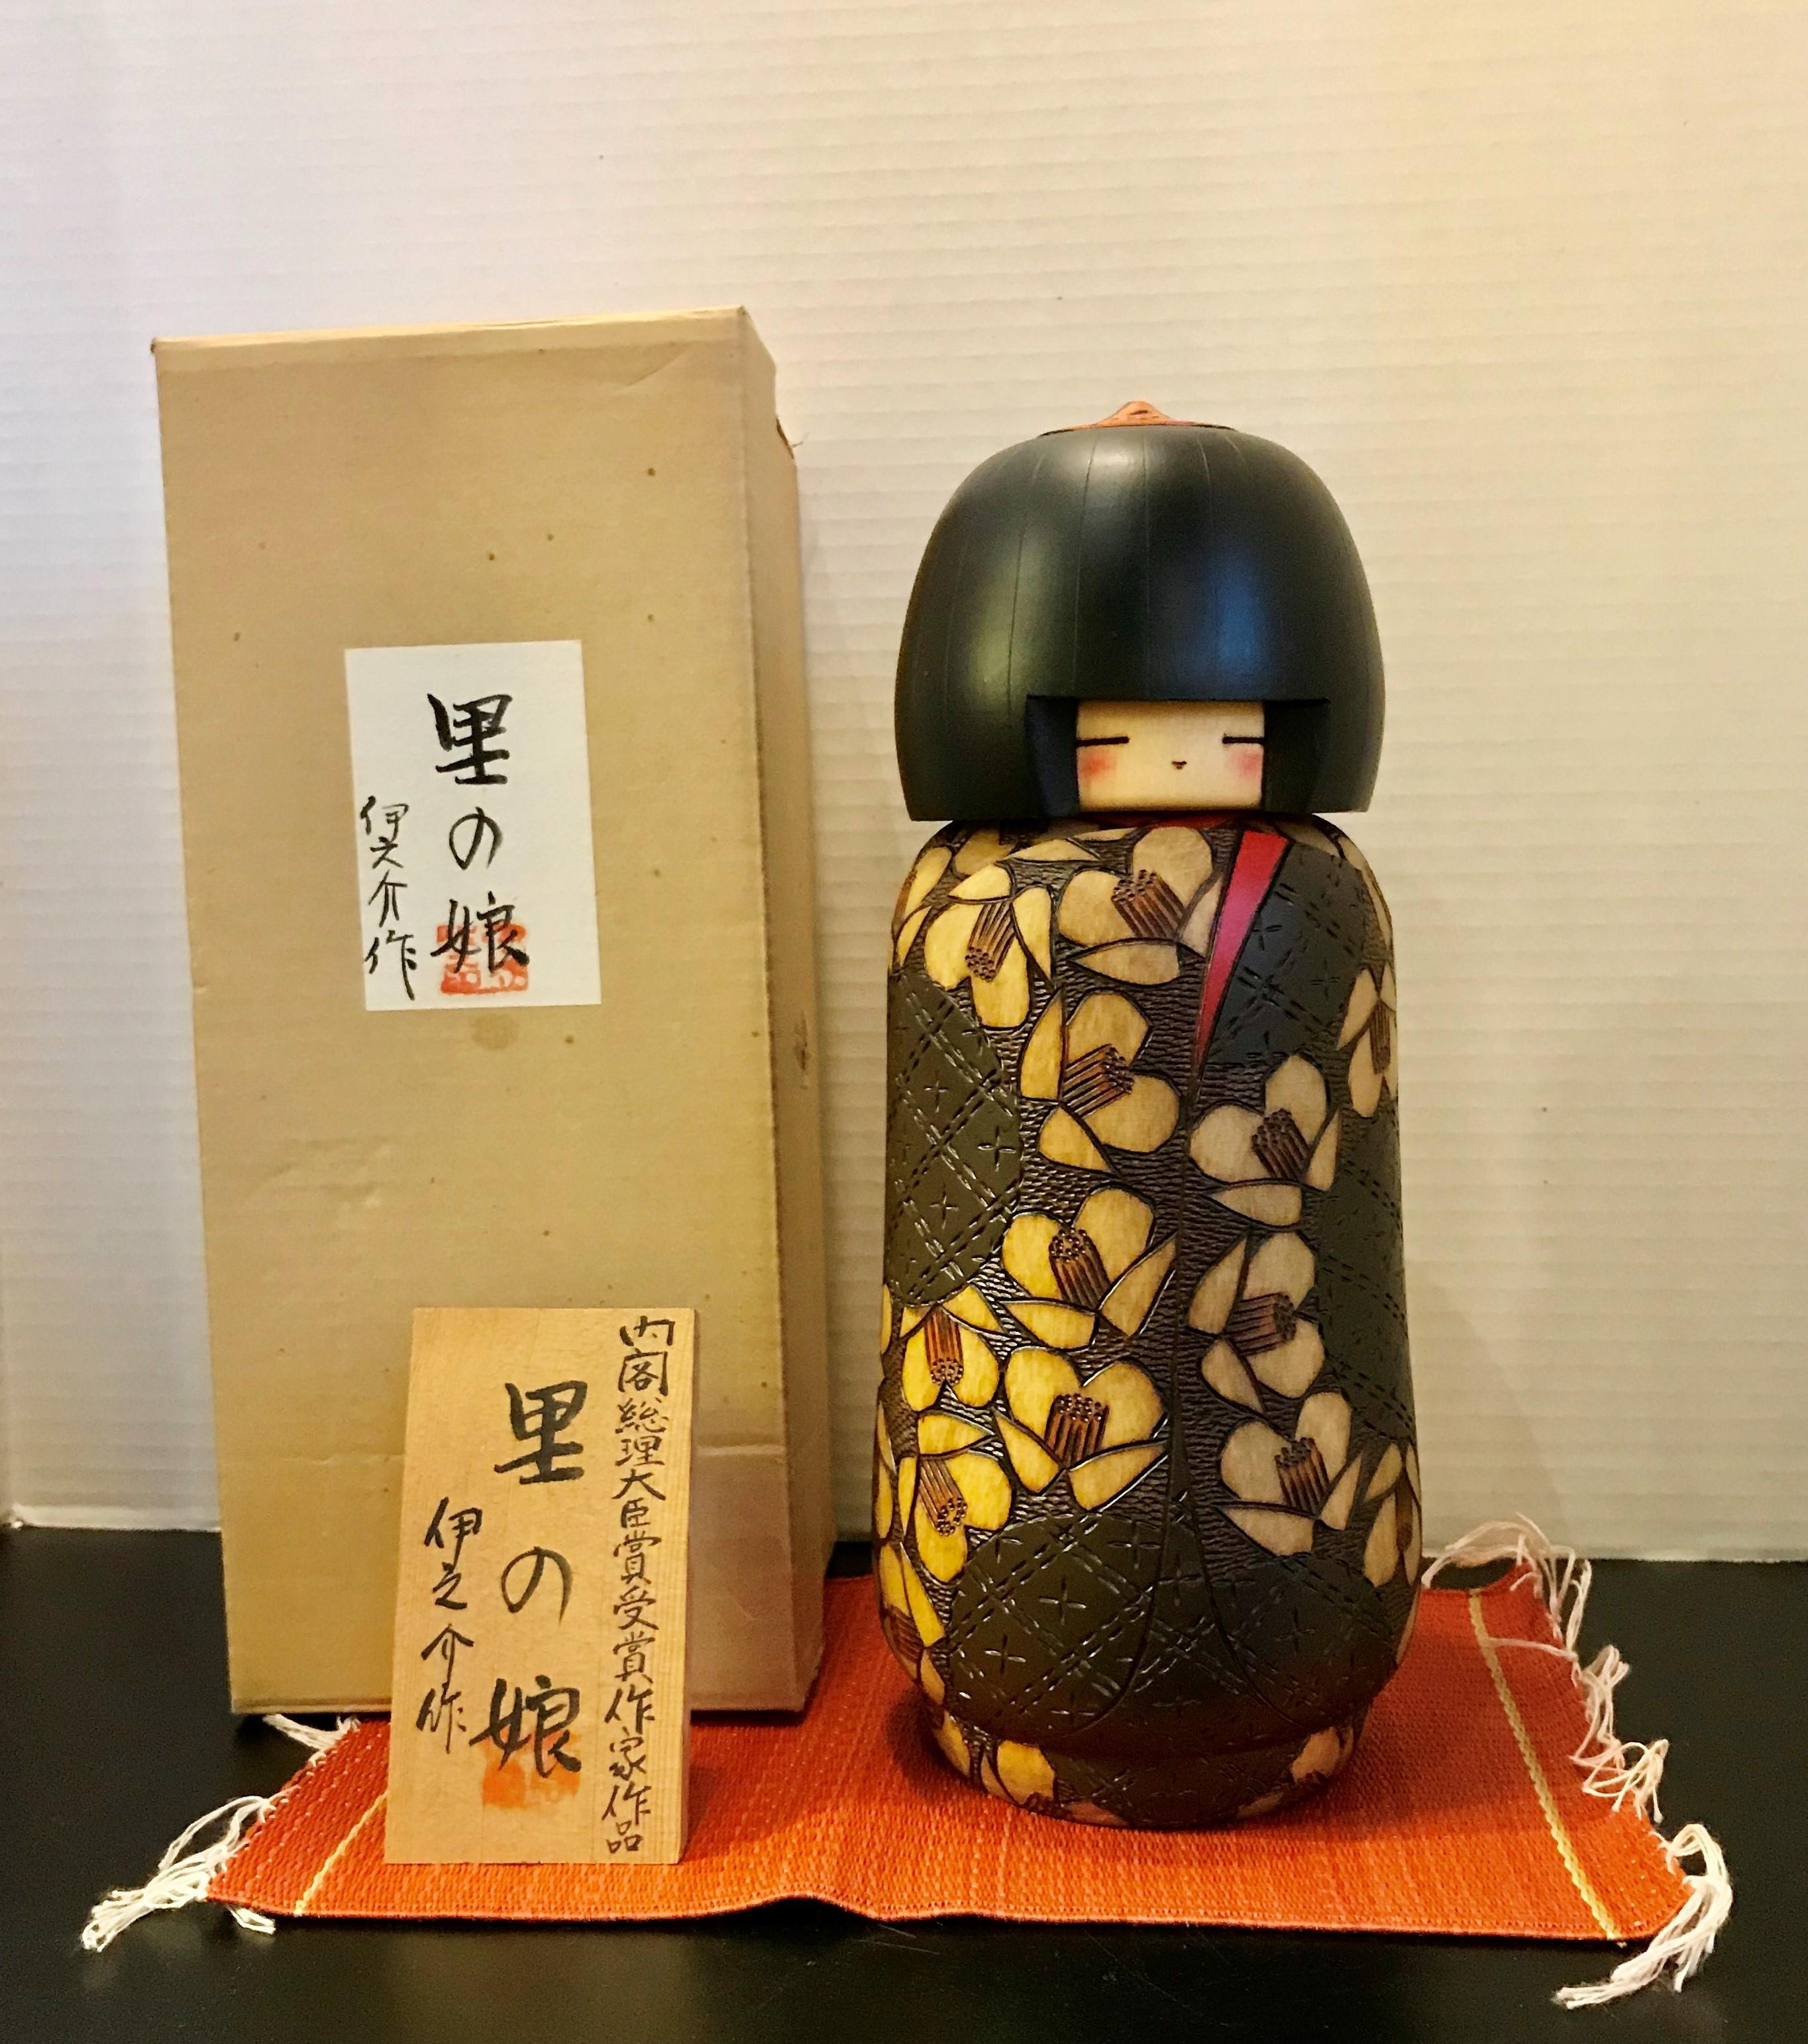 Kokeshi dolls in olden days were toys for children in Northen Japan which parents would gift to a new born child. Woods from the north of Japan would be used for the Kokeshi and a lathe and a plane would be used to create the body and head. The most